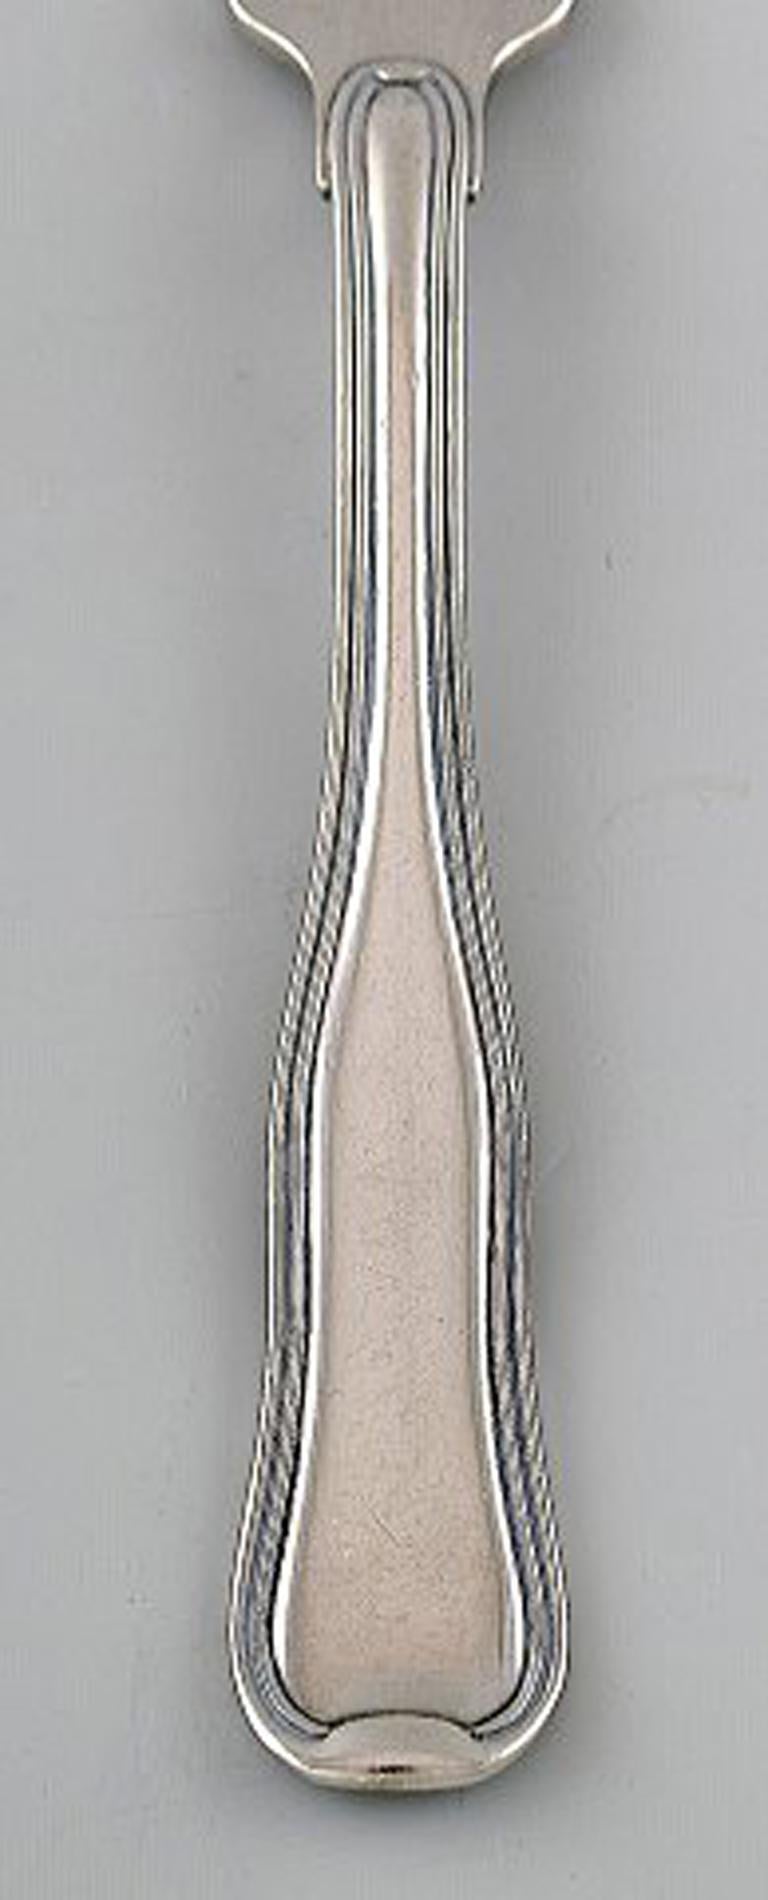 Georg Jensen Old Danish lunch fork. 7 pieces in stock.
Stamped.
In very good condition.
Measures: 17 cm.